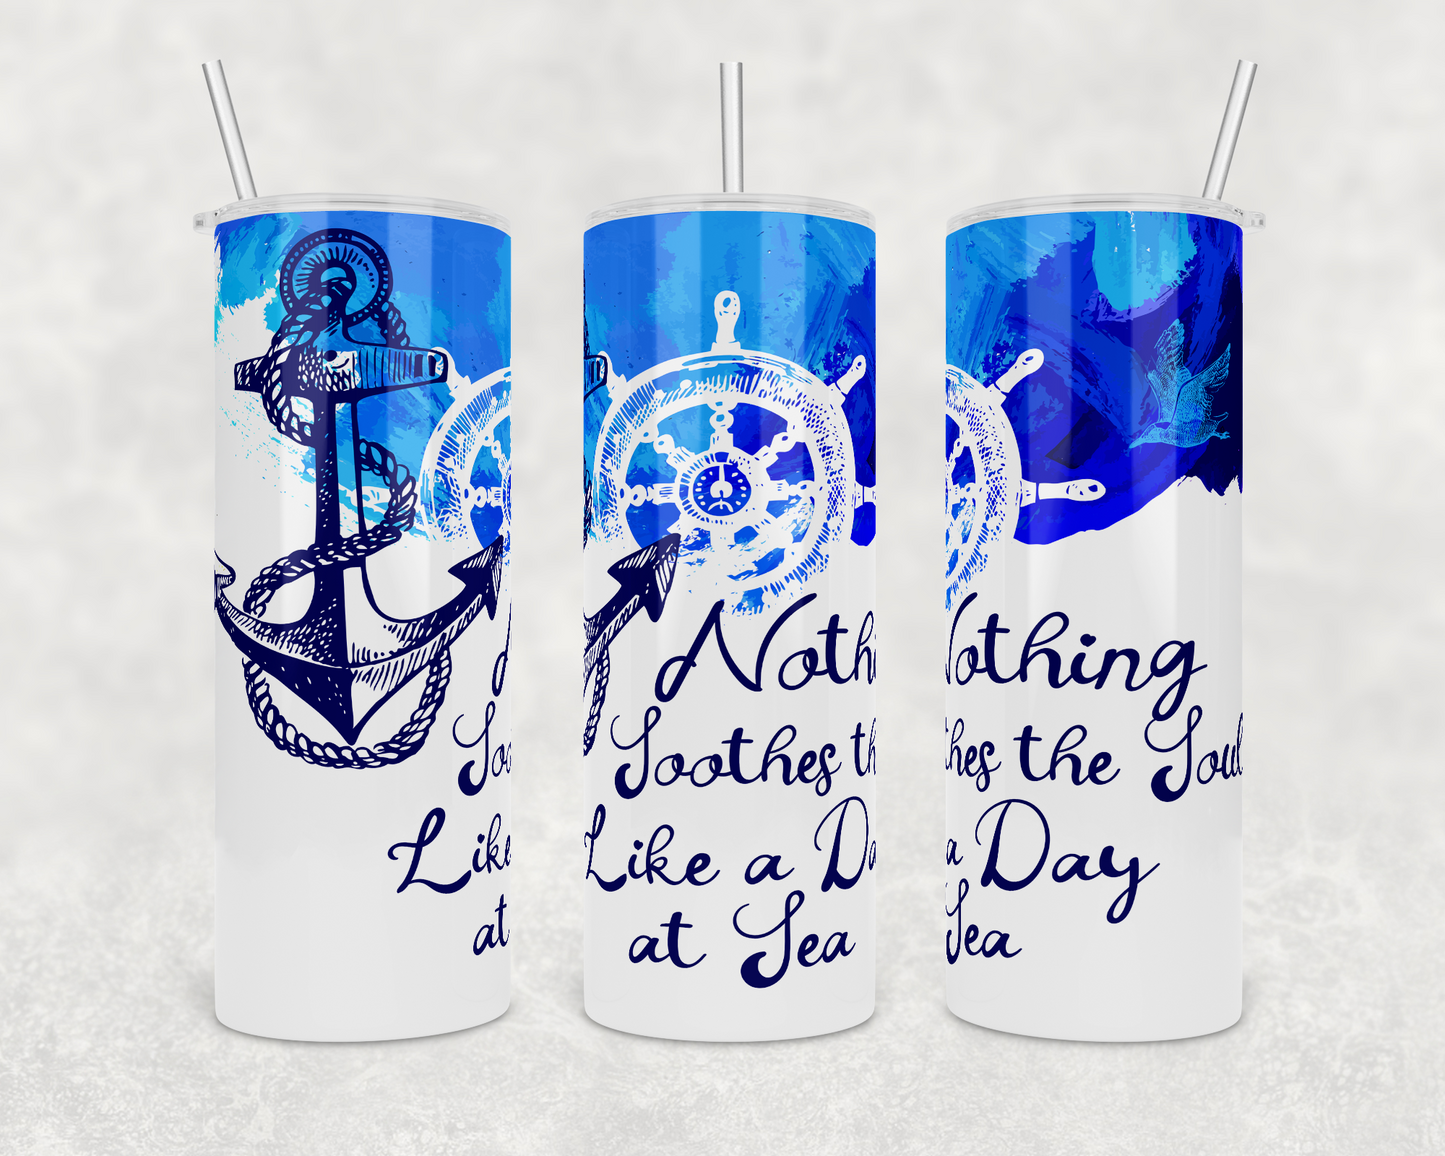 Nothing Soothes the Soul Like A Day At Sea Insulated Drink Tumbler - The Salty Anchor